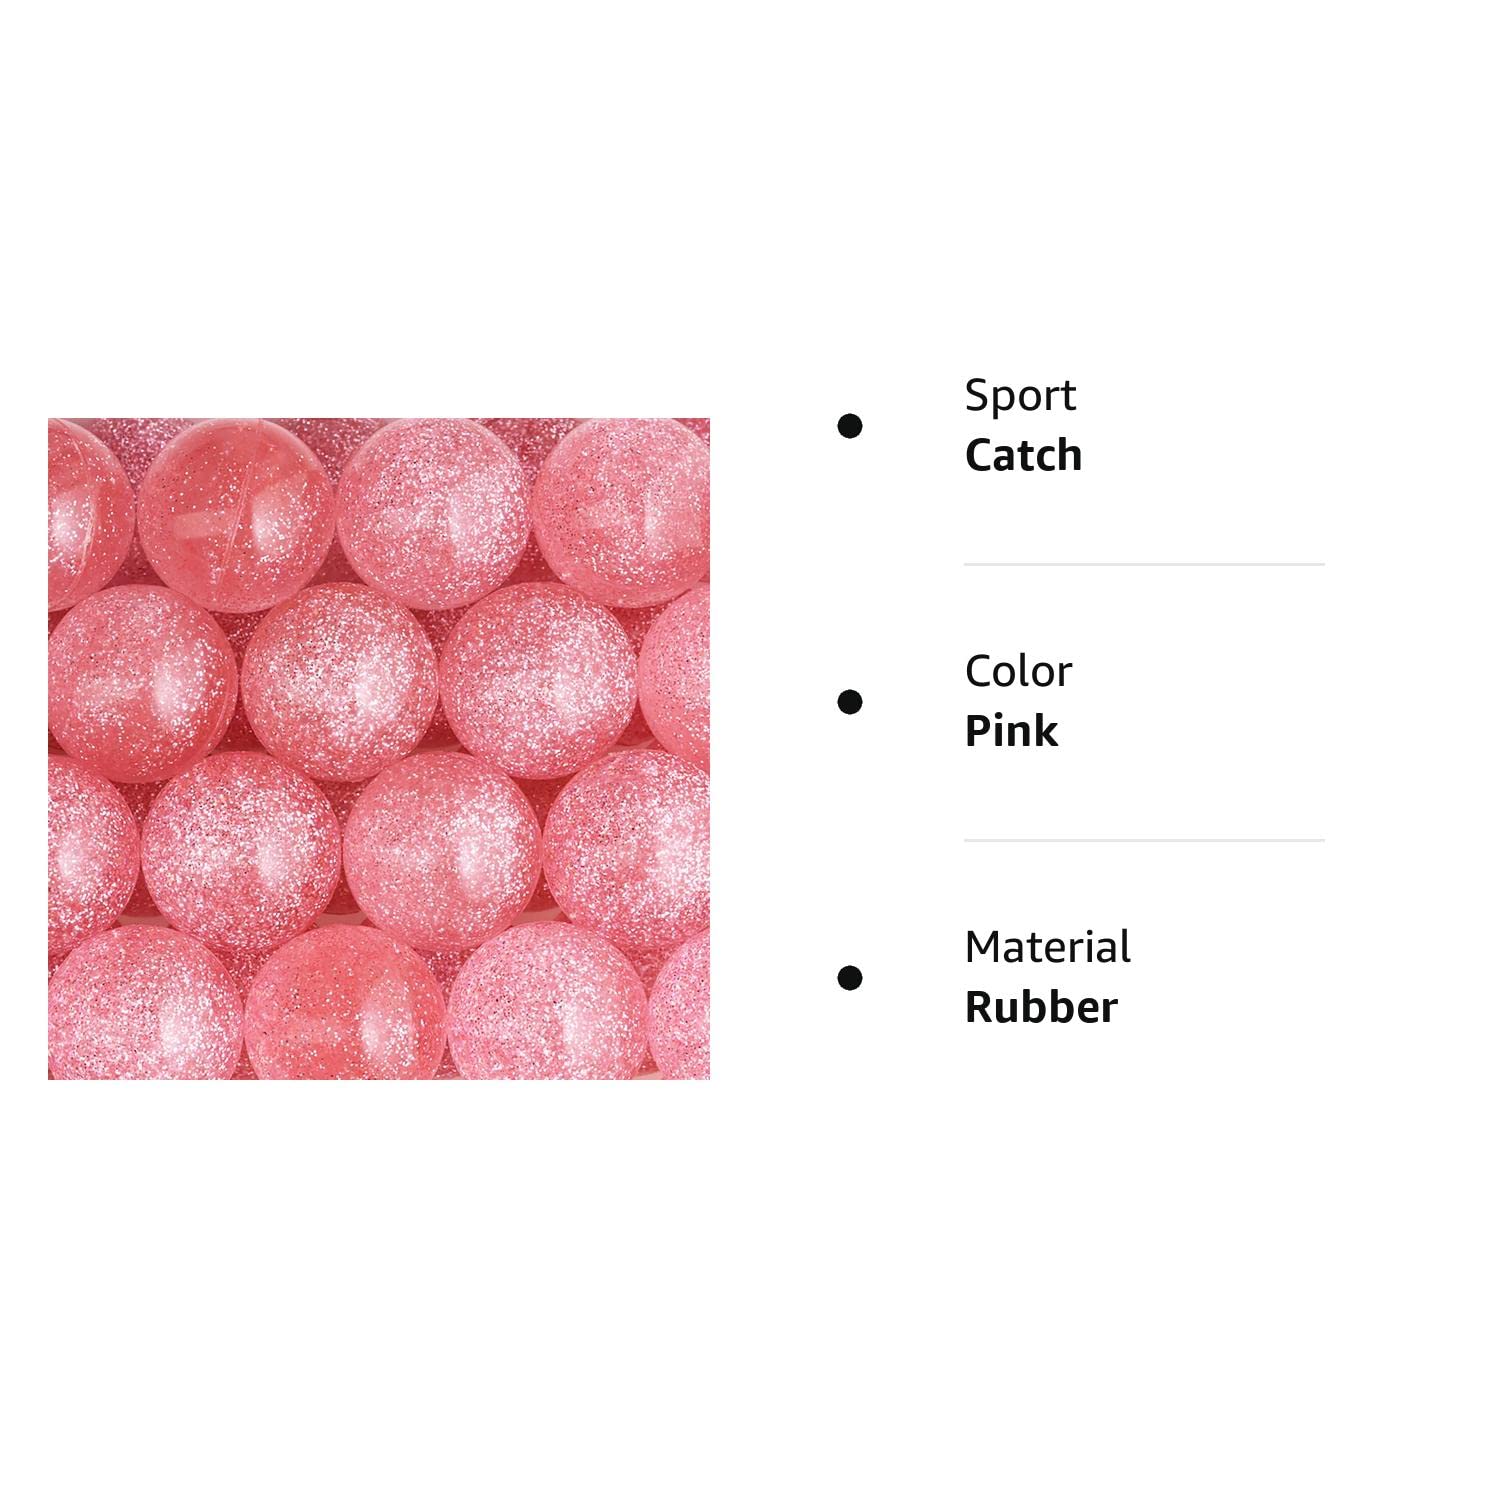 Entervending Bouncy Balls - Pink Glitter Bouncy Balls - Party Favors and Gifts for Kids - Rubber Balls - 25 Pcs Large Bouncy Balls 45mm - Vending Machine Toys - Goodie Bag Fillers